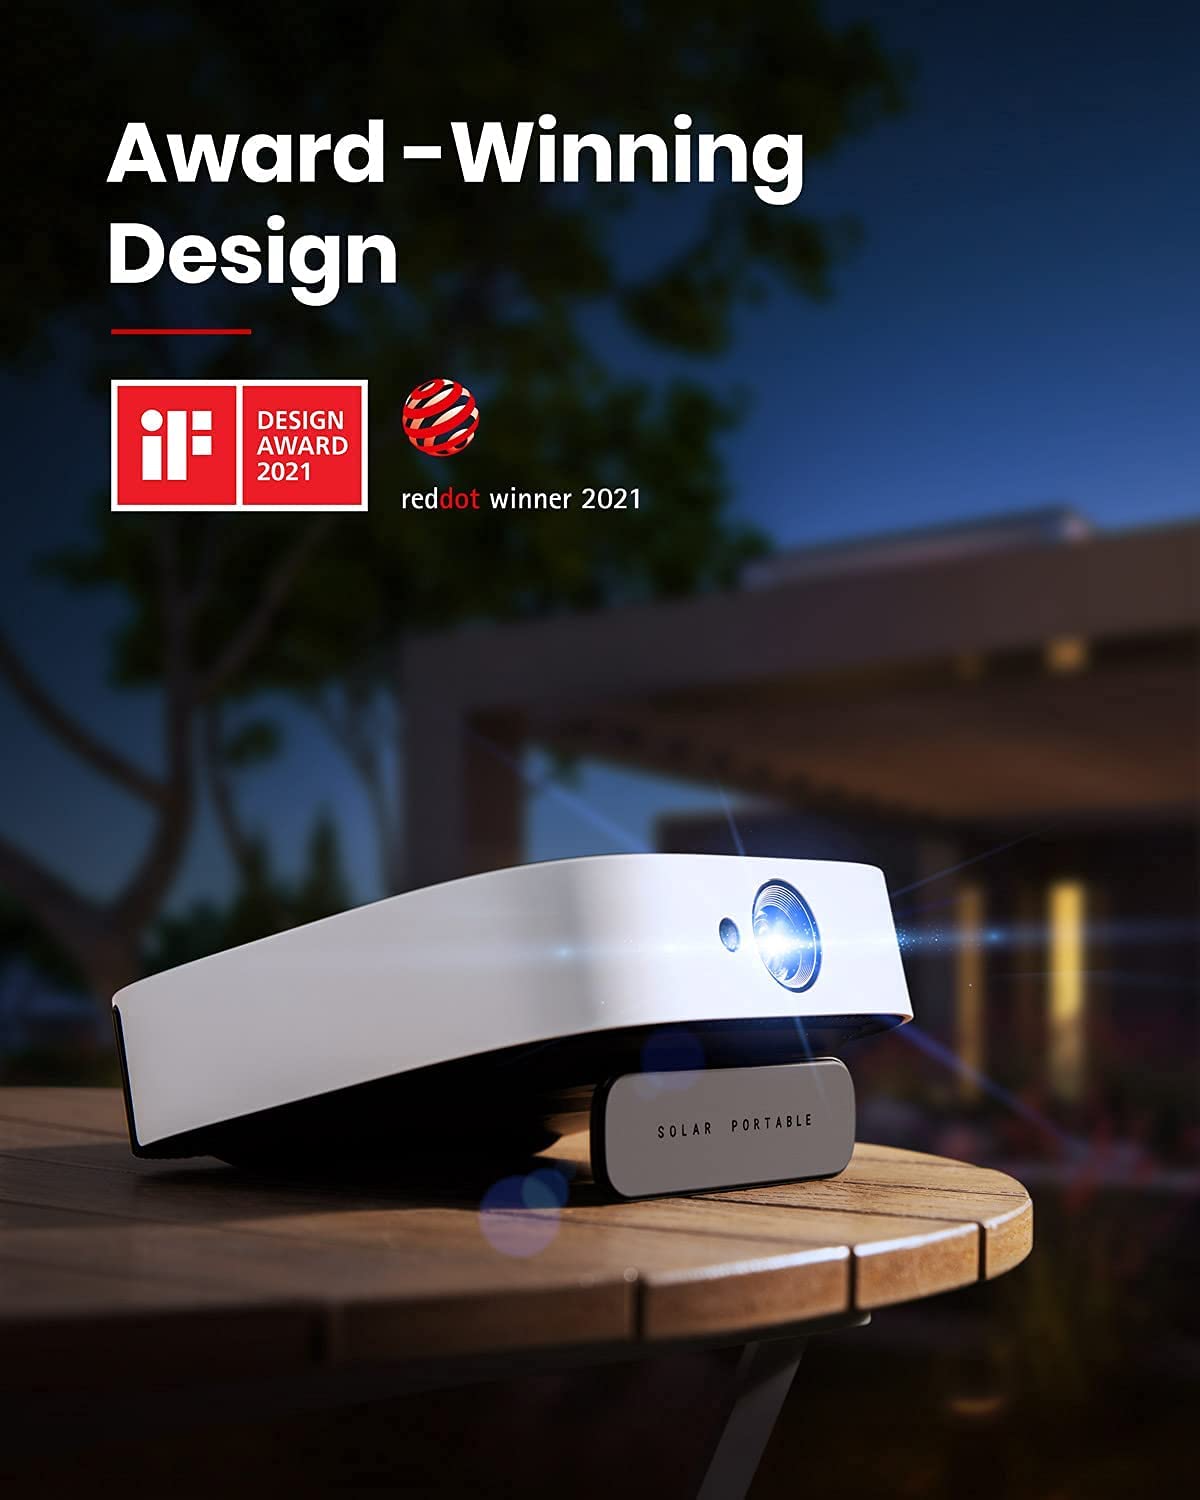 Check out the award-winning design of Solar Portable with recognition from iF Design and Red Dot.